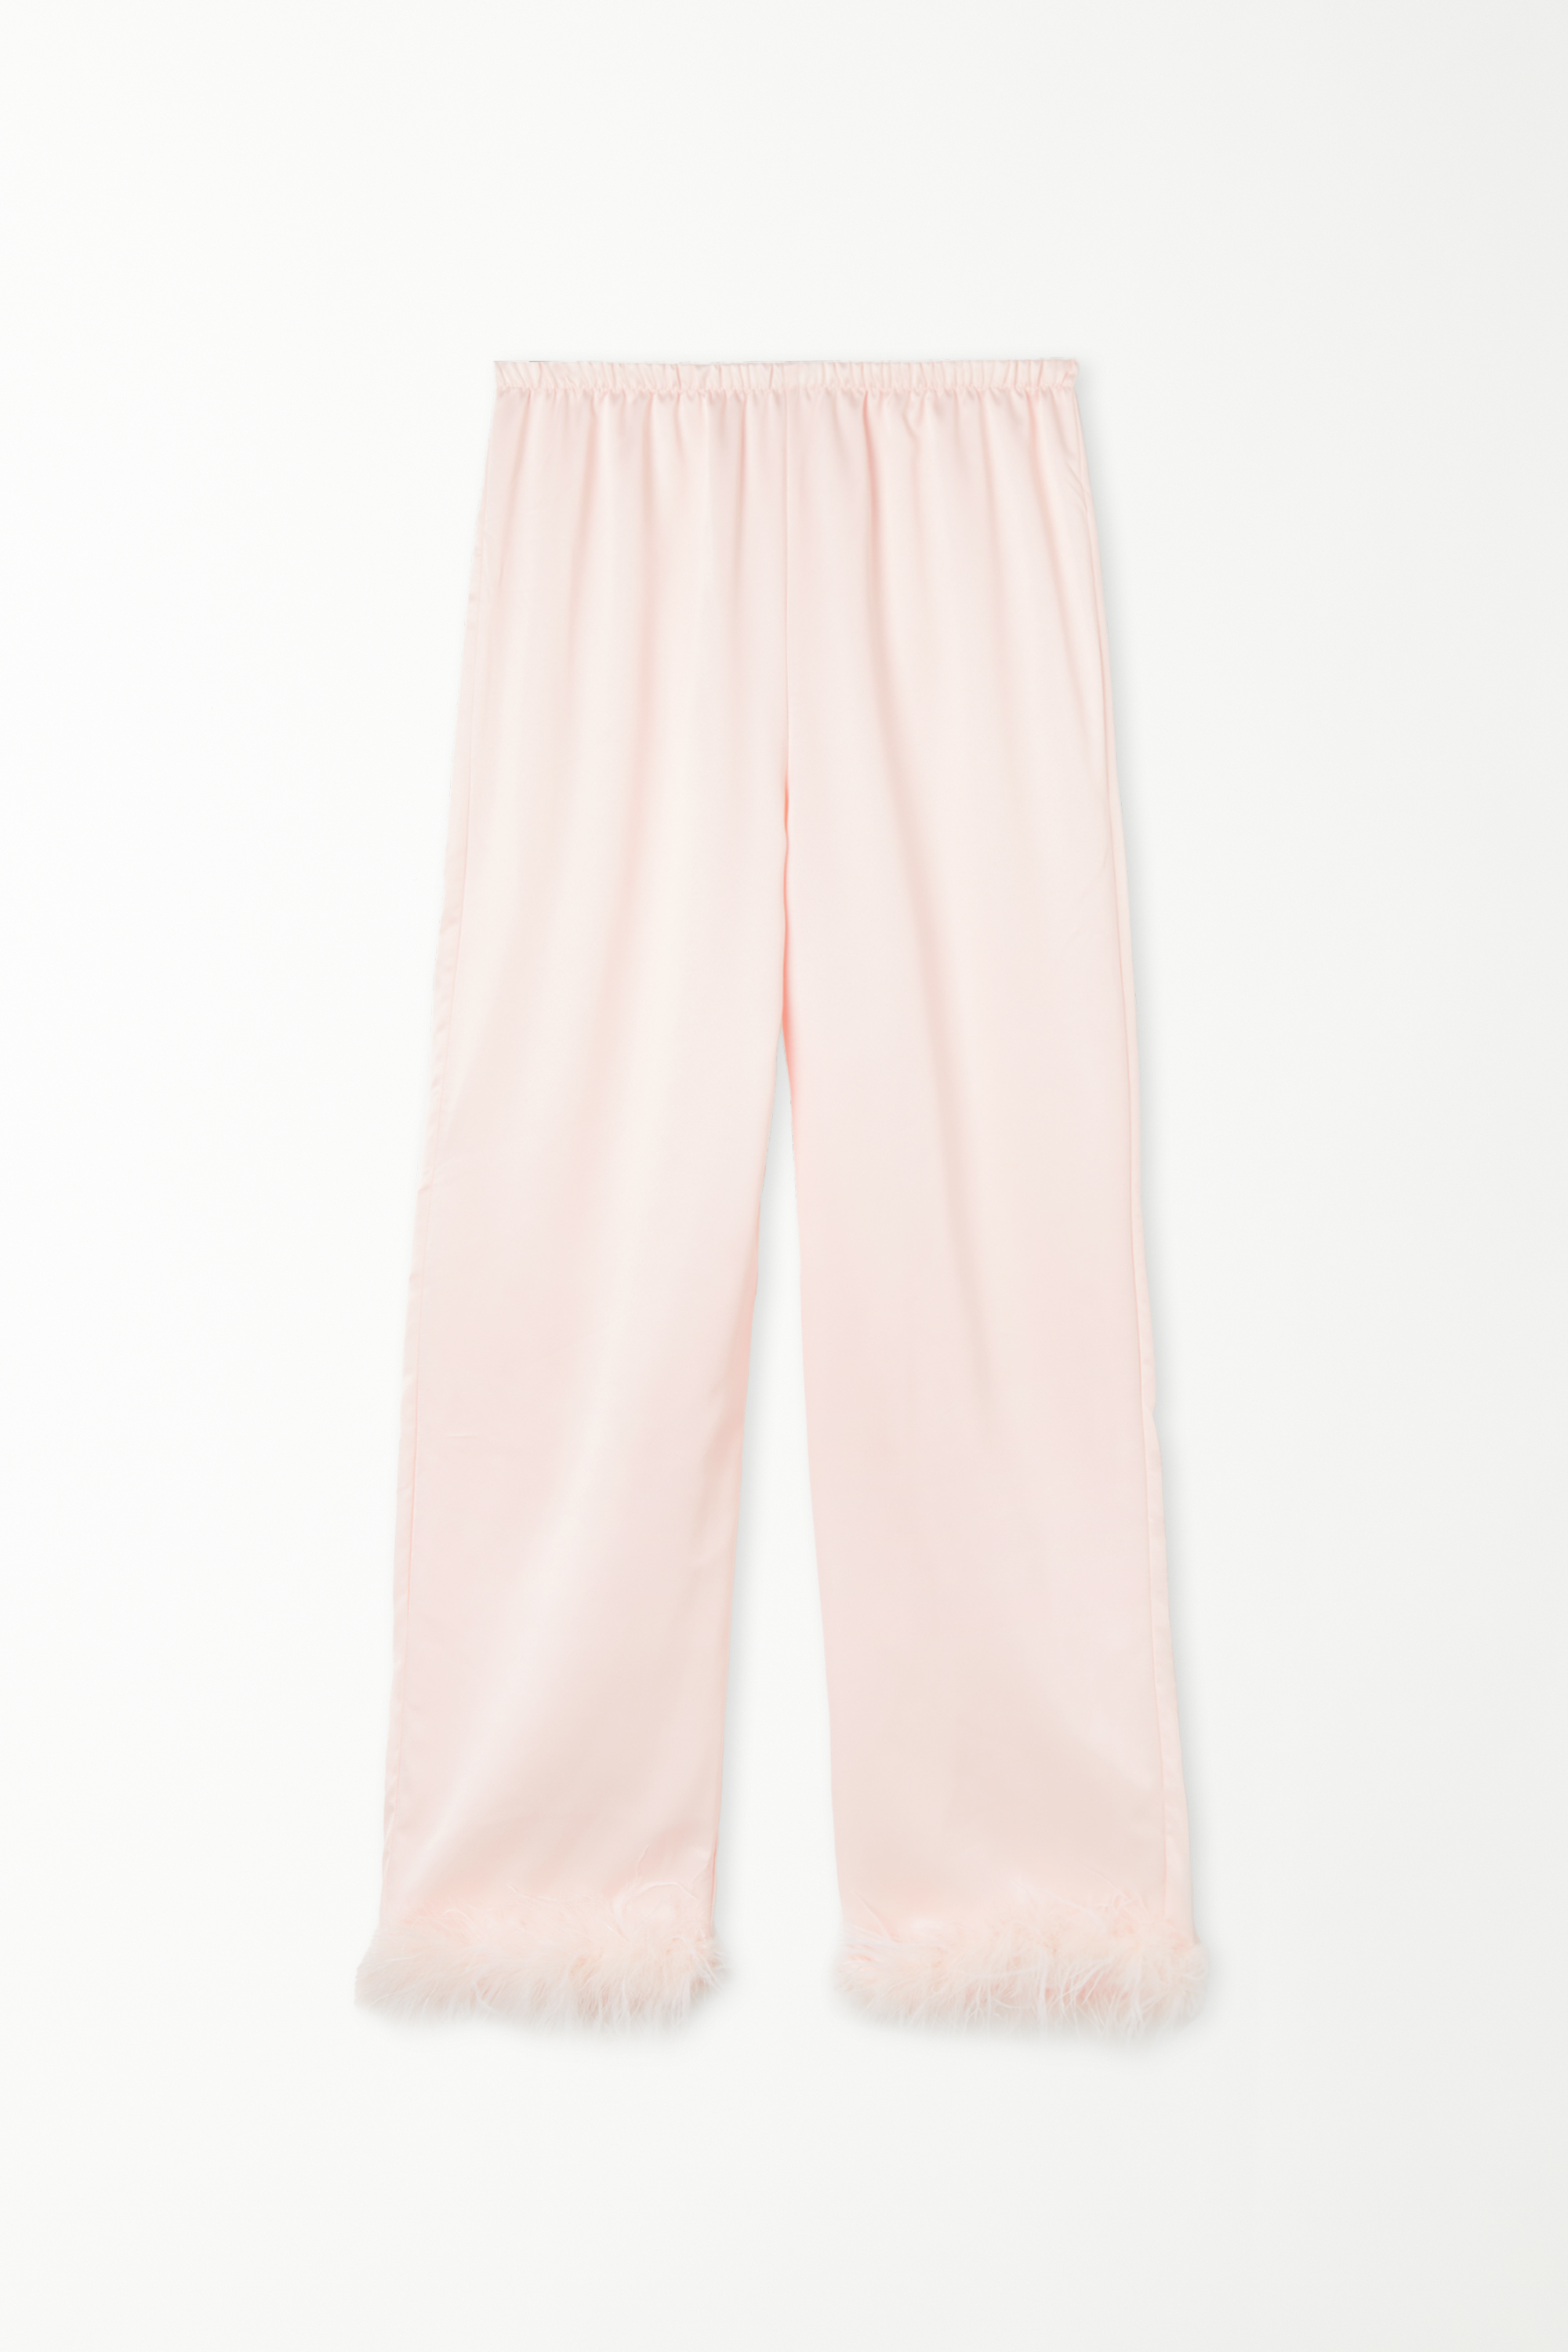 Limited Edition Satin Trousers with Feathers